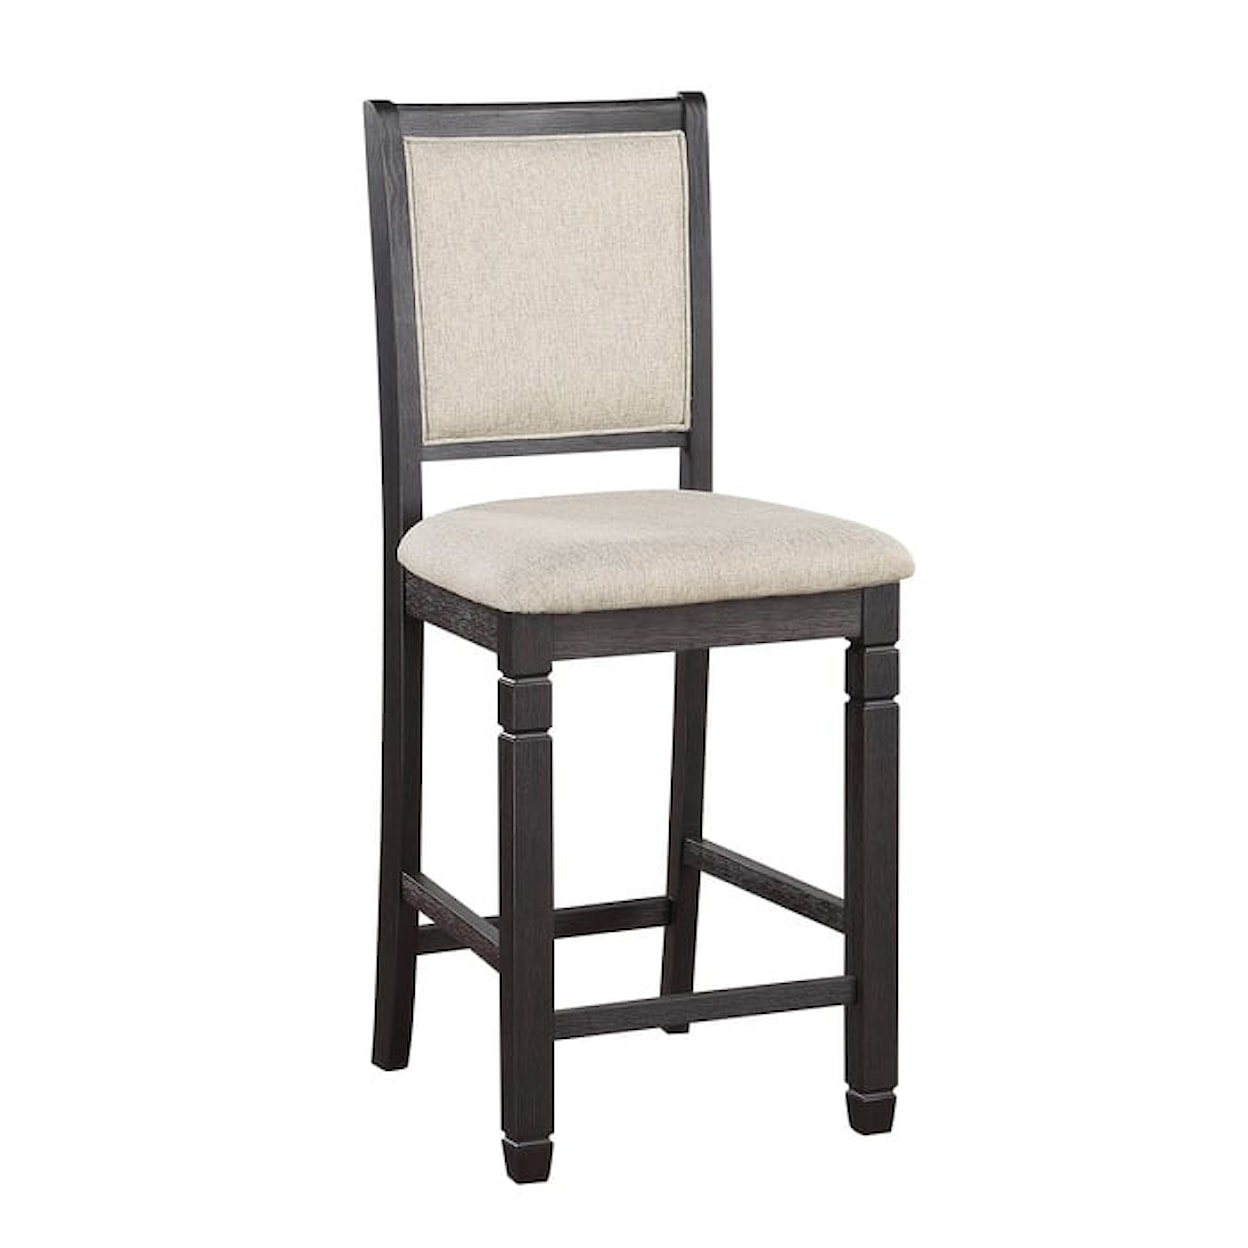 Homelegance Furniture Asher Counter Height Chair